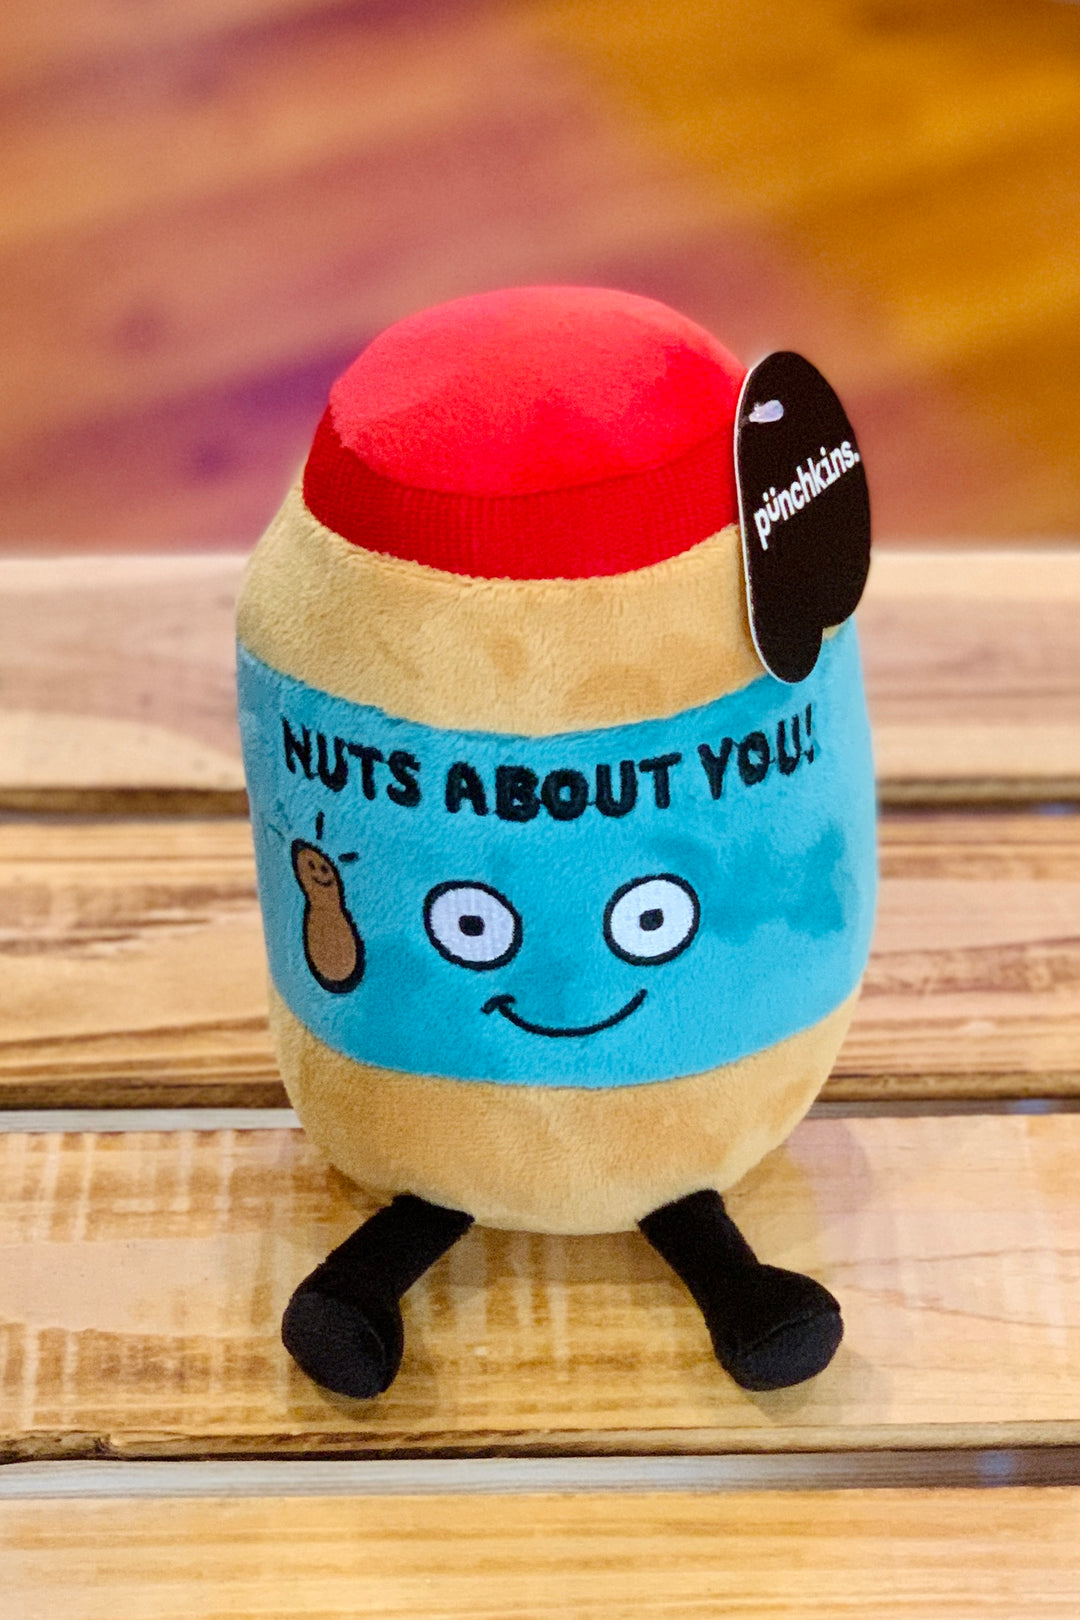 "Nuts About You" Punchkin